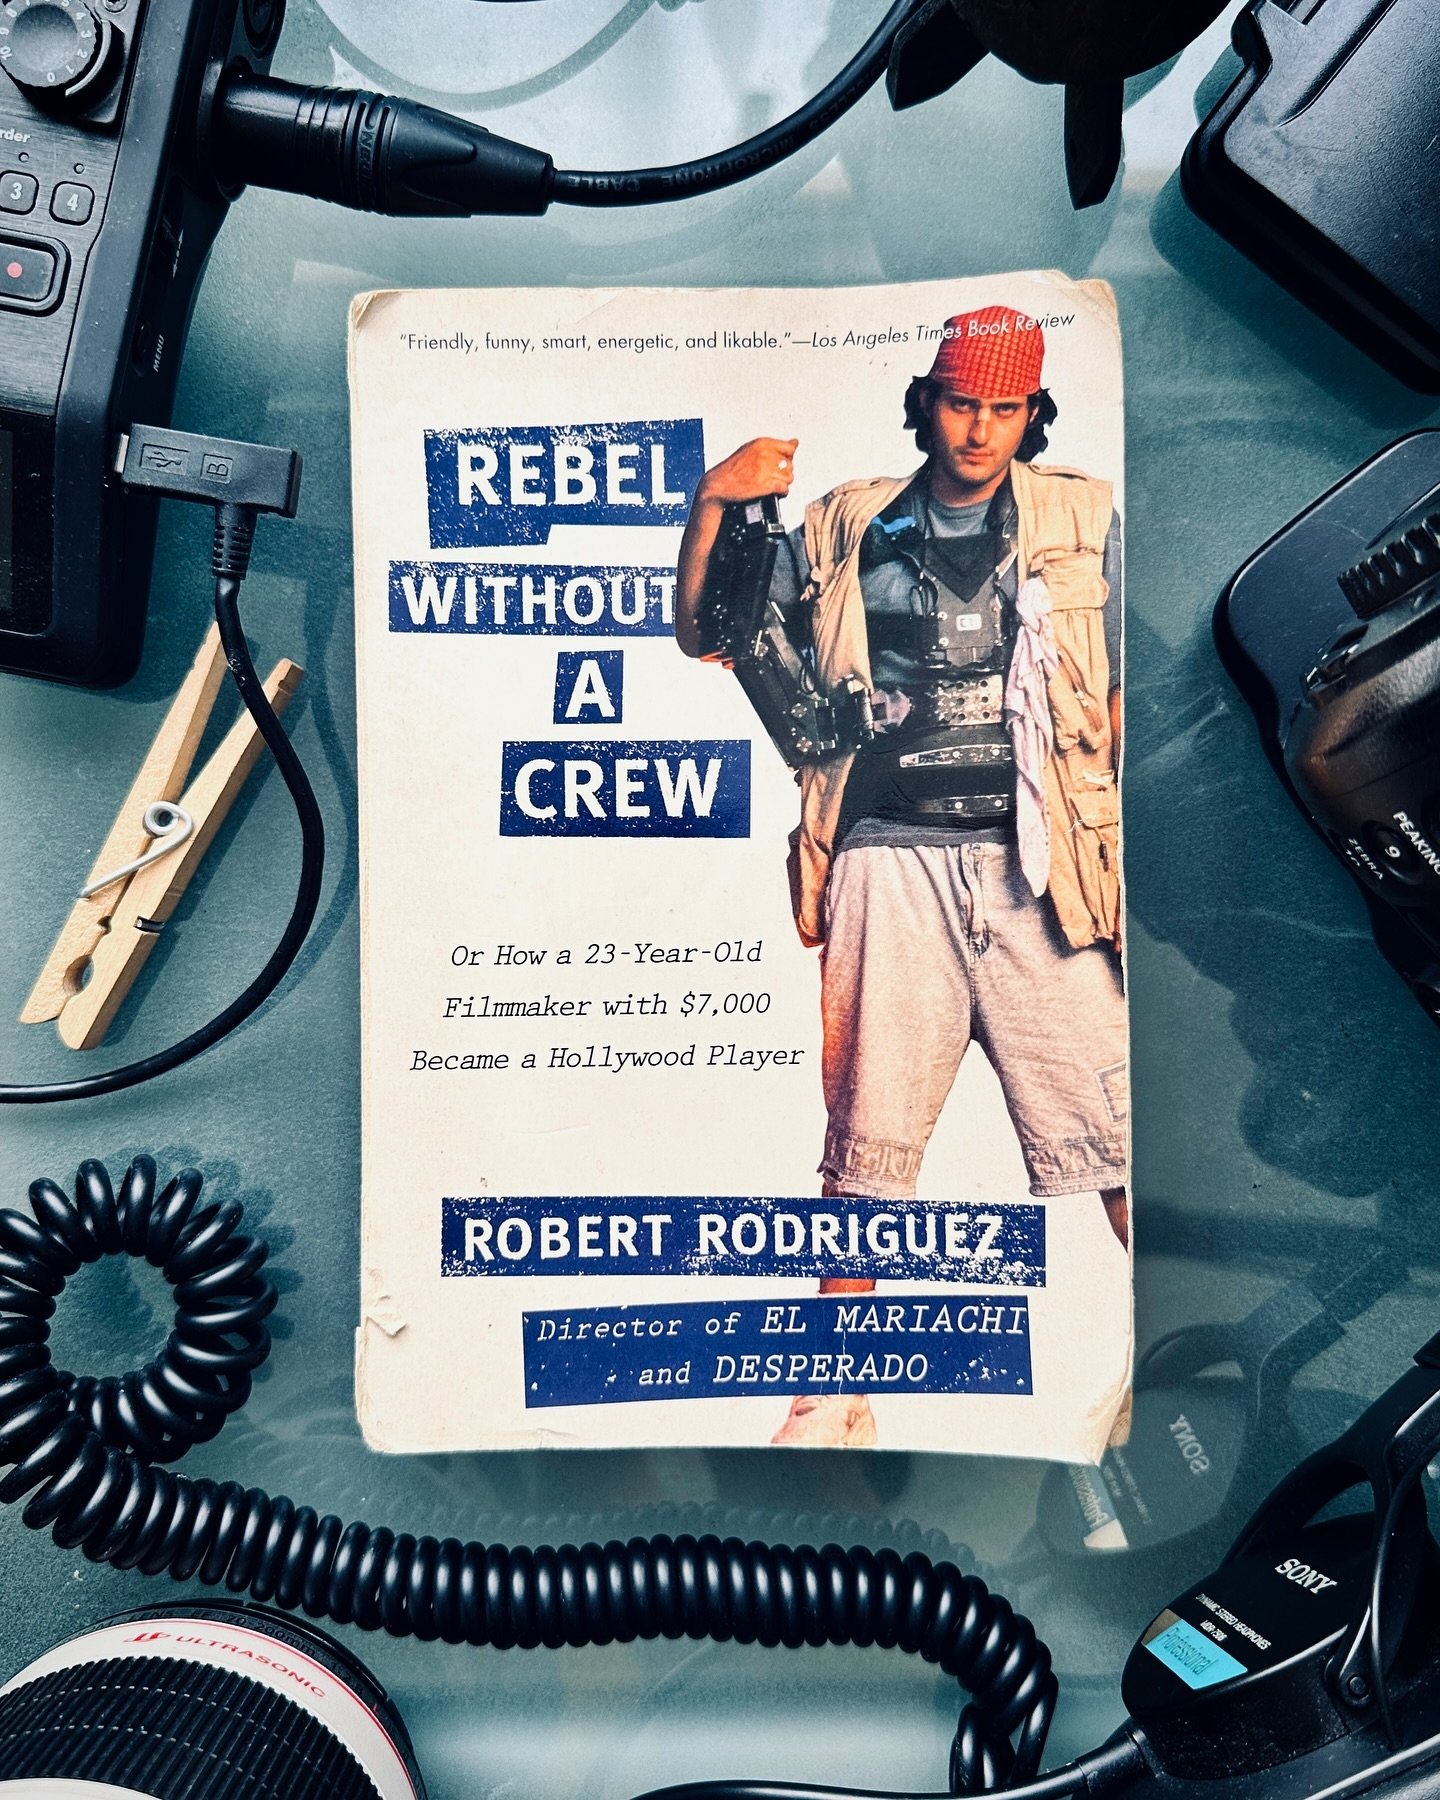 &ldquo;The bottom line is that there is no one way to do things. Invent whatever works for you.&rdquo; Robert Rodriguez&rsquo;s &lsquo;Rebel Without a Crew&rsquo; helped spark our DIY ethos at Hard 90 and inspired us to bring our cinematic dreams to 